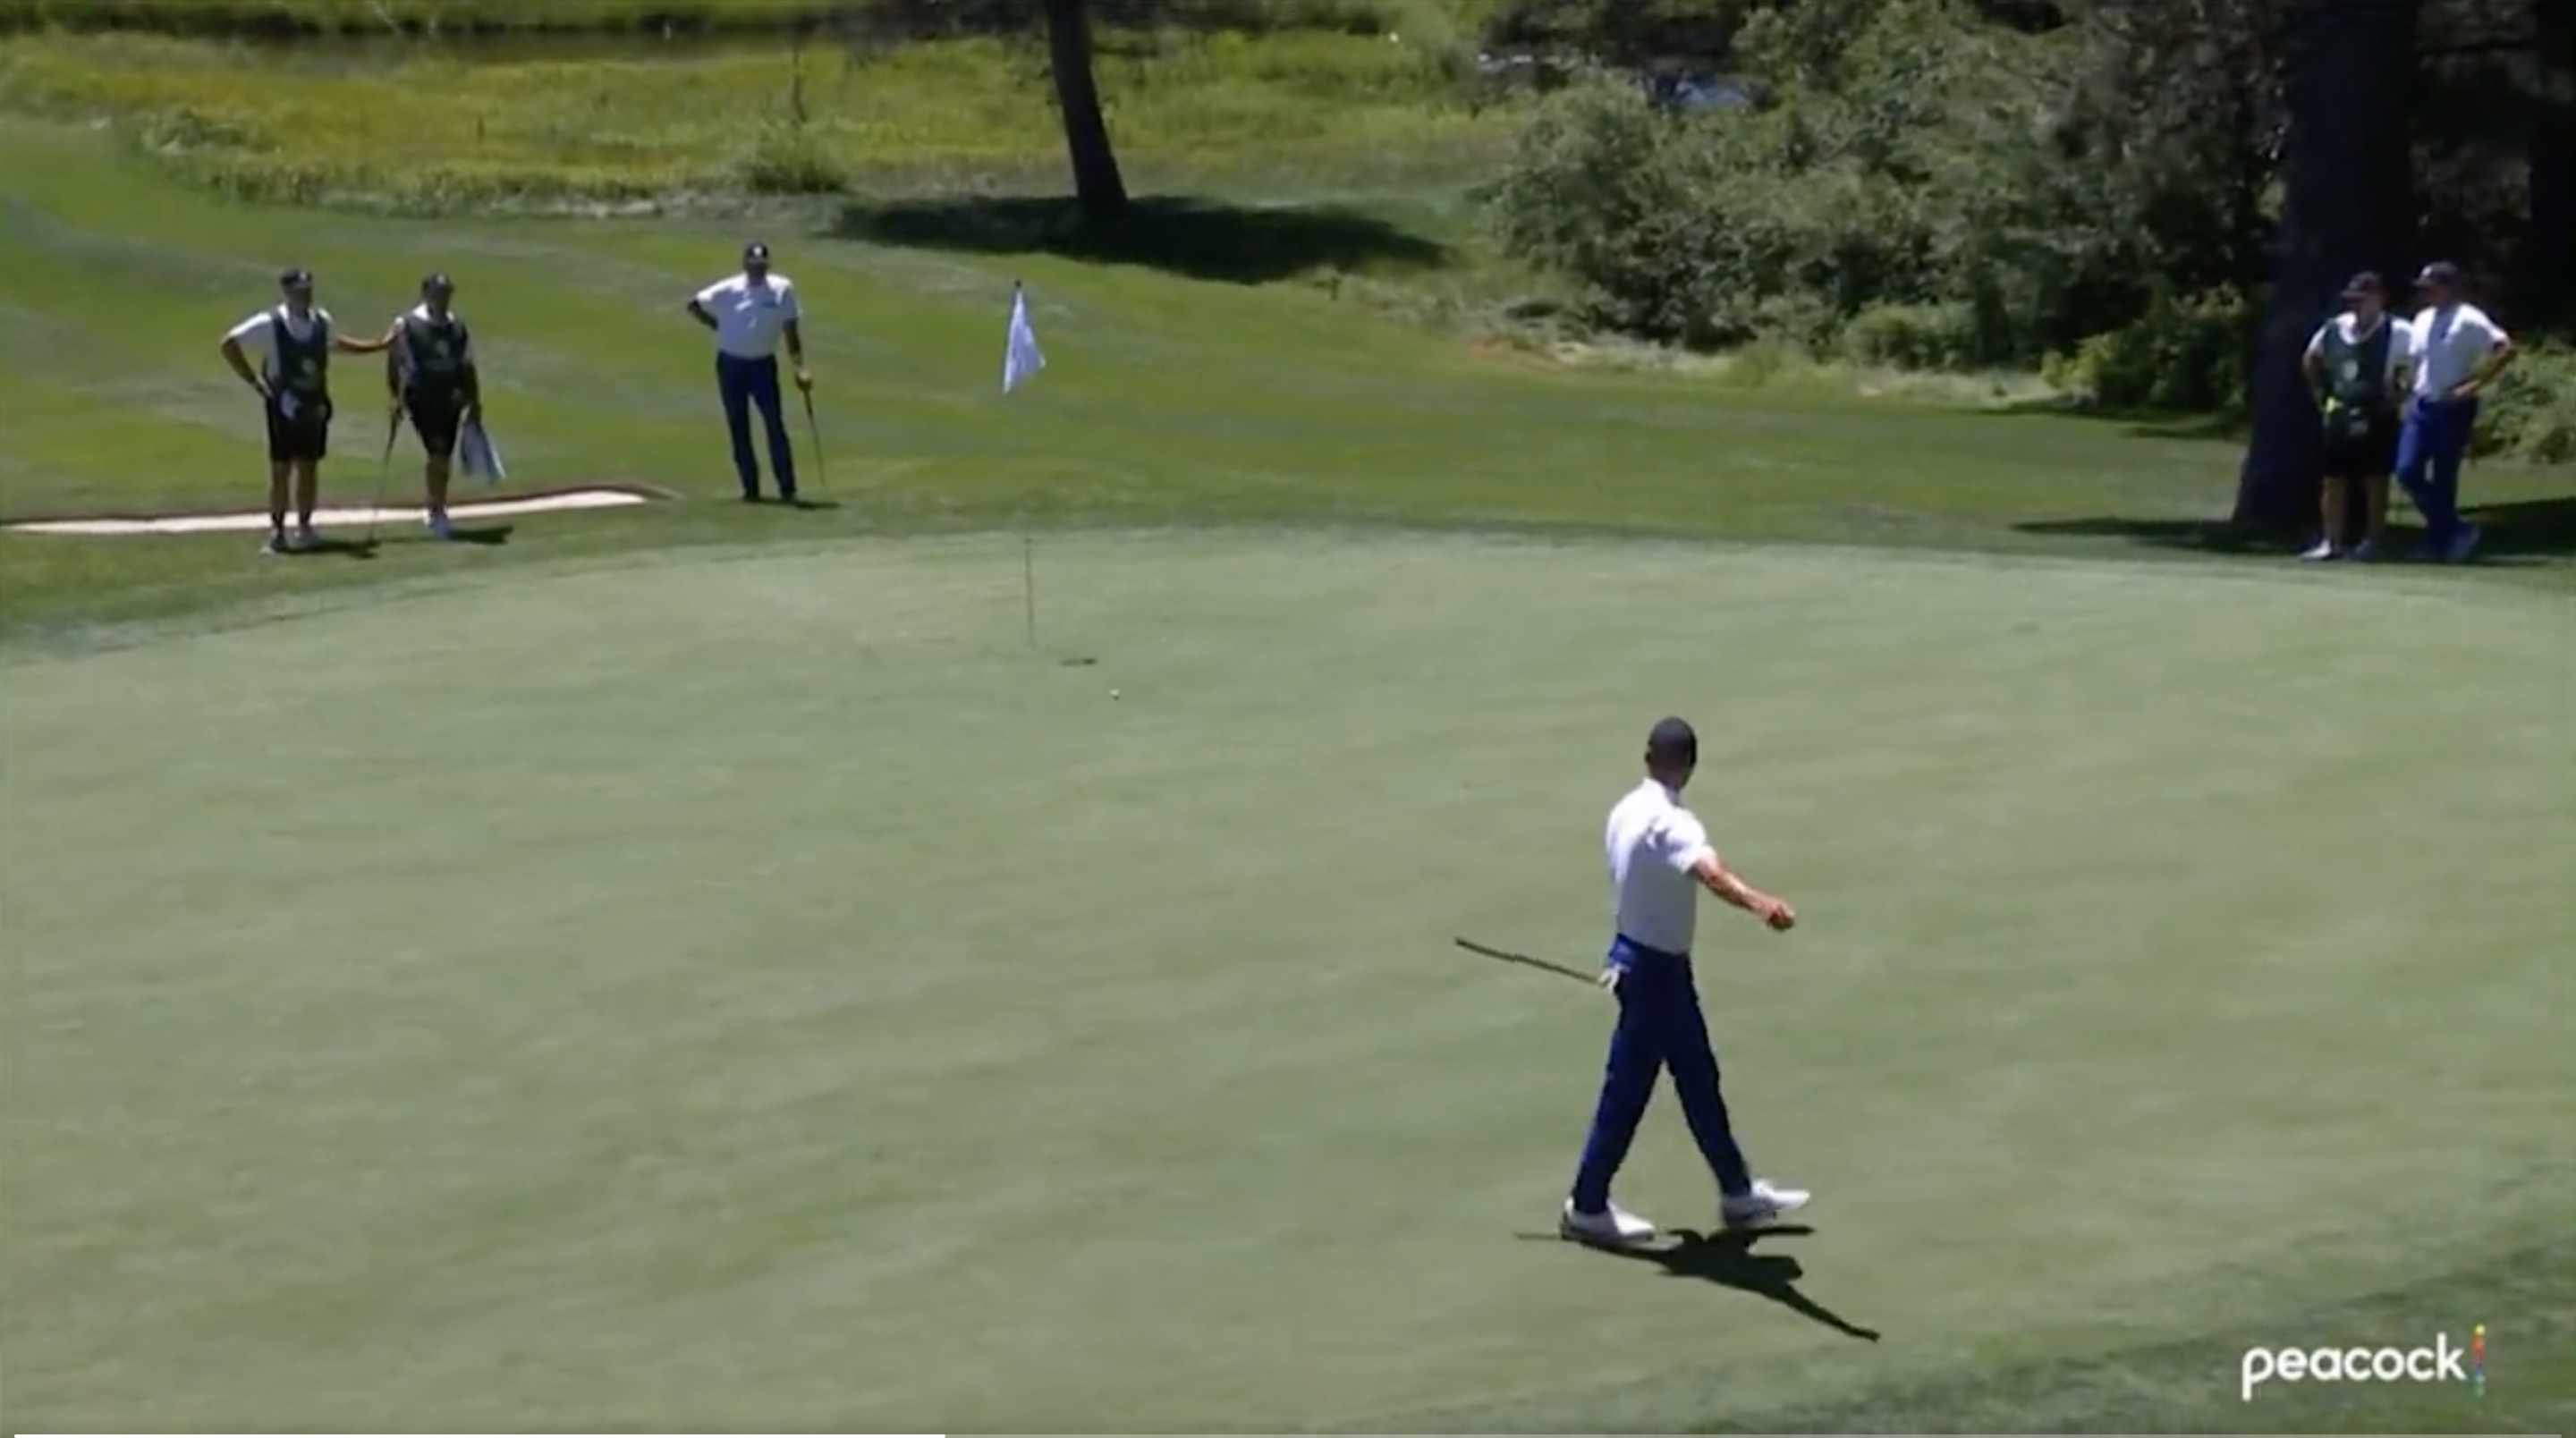 Steph Curry makes a ridiculous putt at a celebrity golf tournament